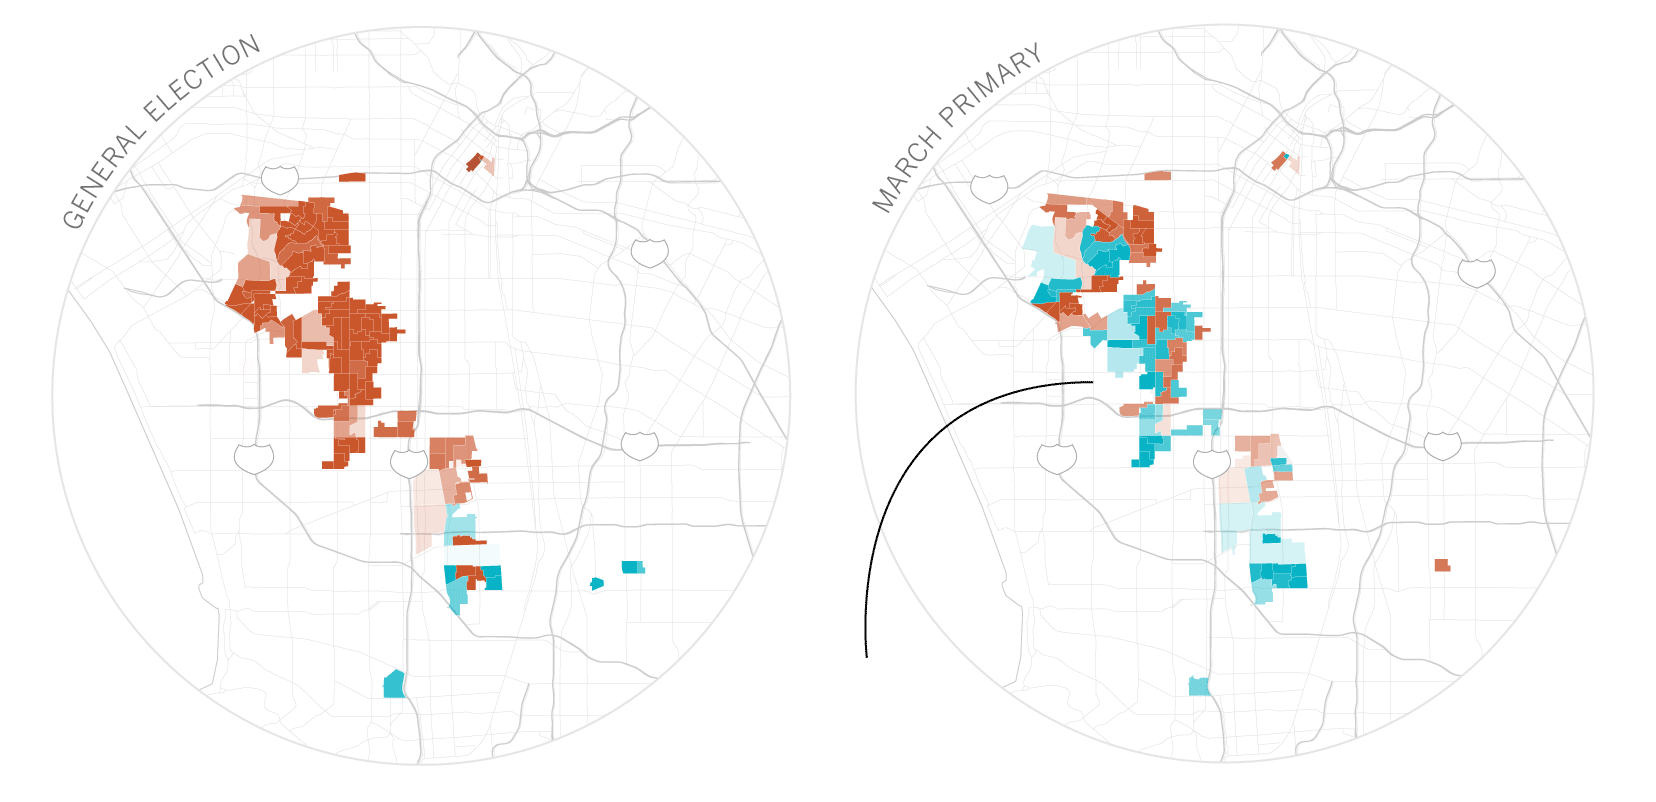 Maps comparing the plurality-black precincts won by Gascon in the primary vs. the general election.